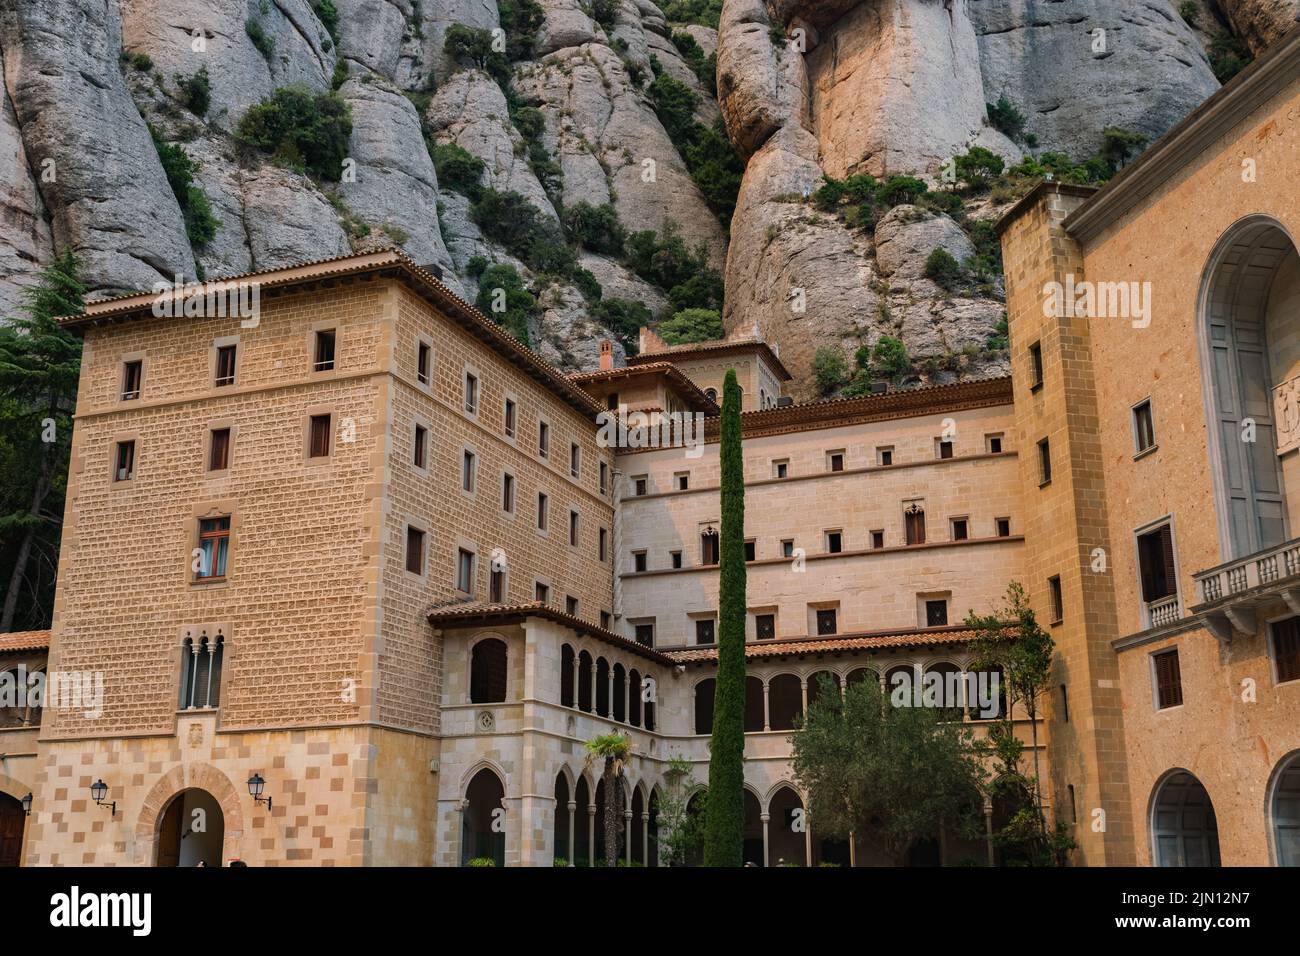 Horizontal shot of monastery buildings in Montserrat, Spain in front of a rocky mountain Stock Photo